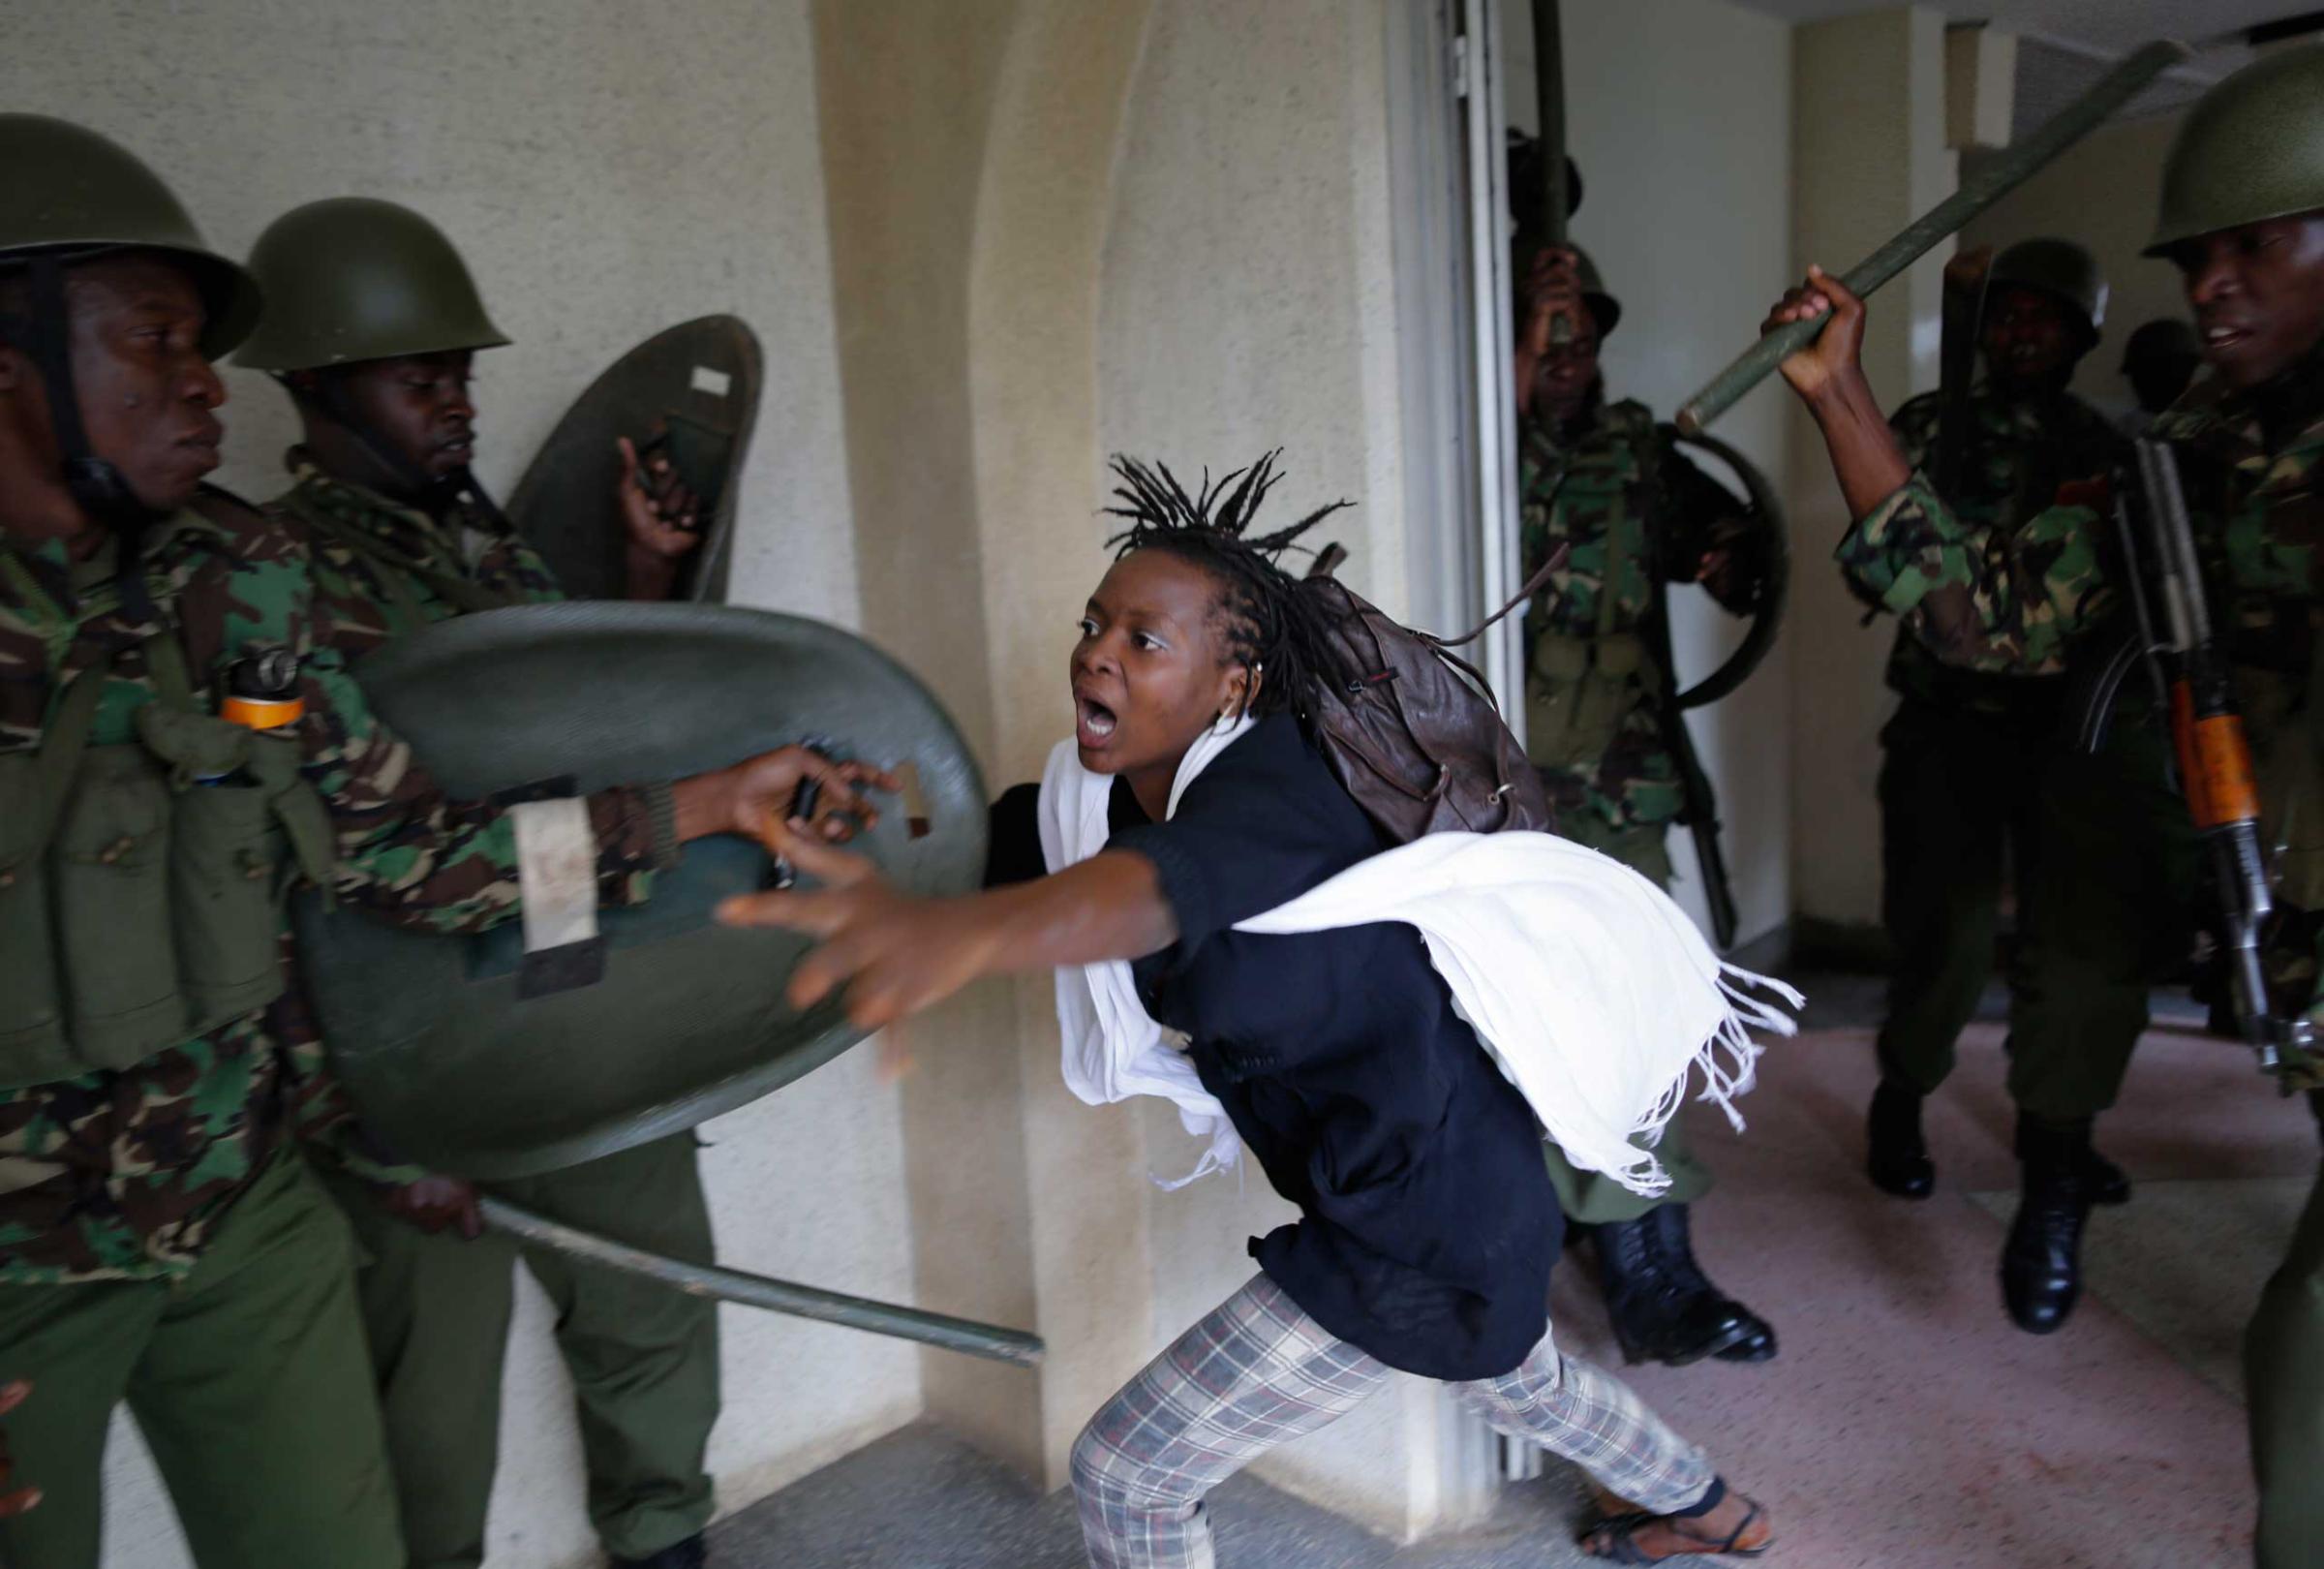 A woman flees as a riot police officer beats her with a baton, after chasing protesting students into the Nairobi University campus in Nairobi, Kenya, May 20, 2014.